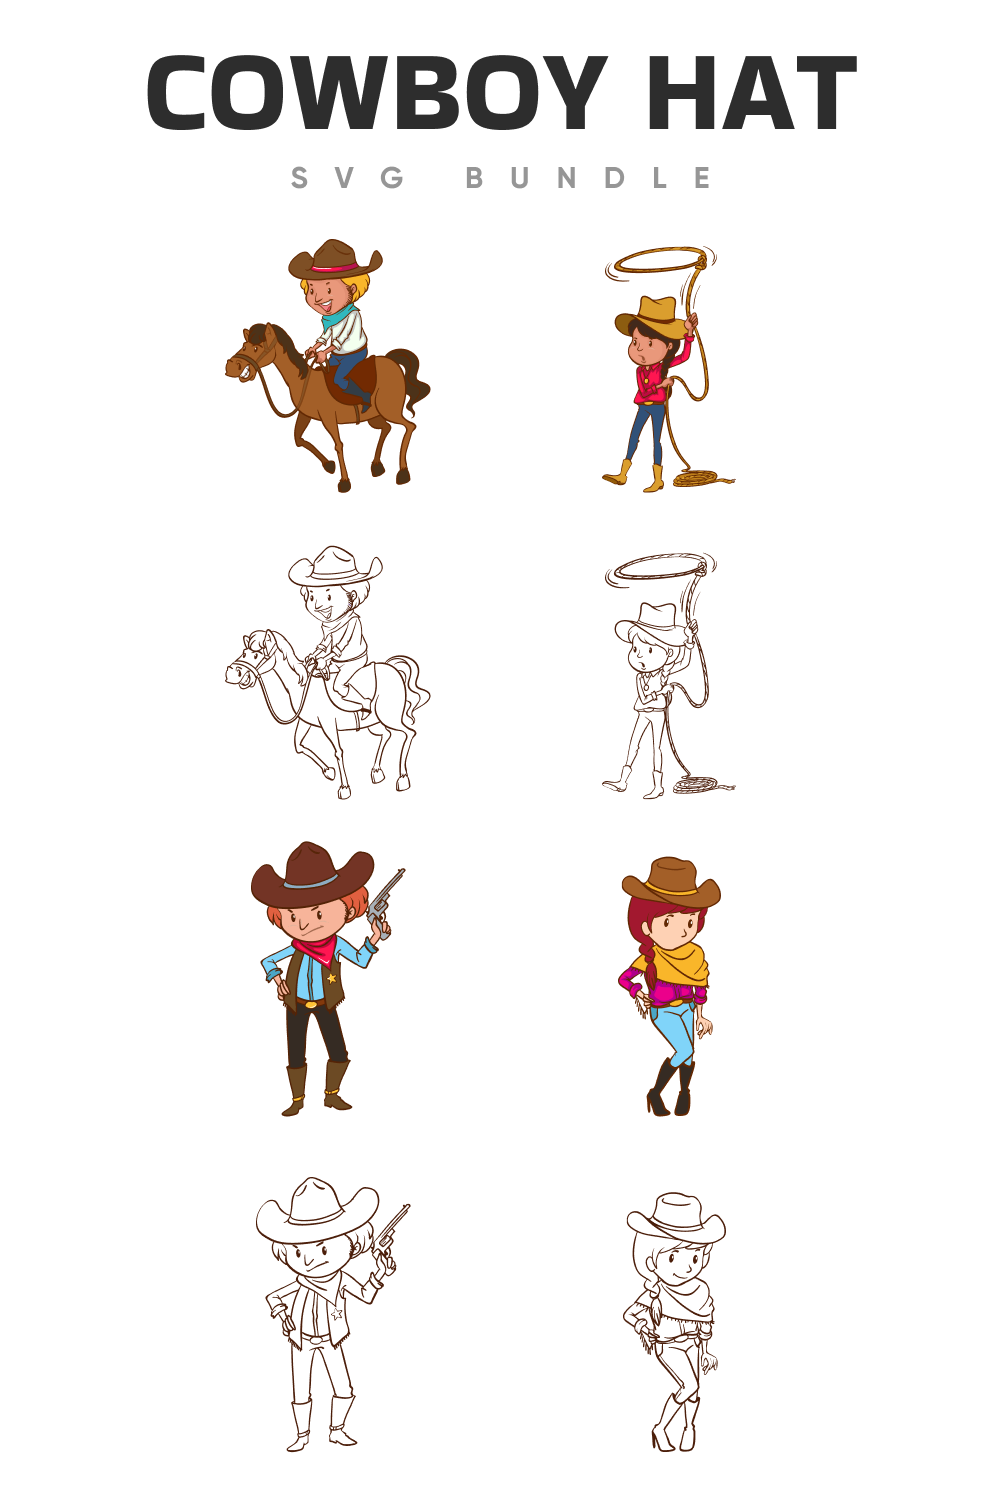 So nice diverse of the cowboy hats.